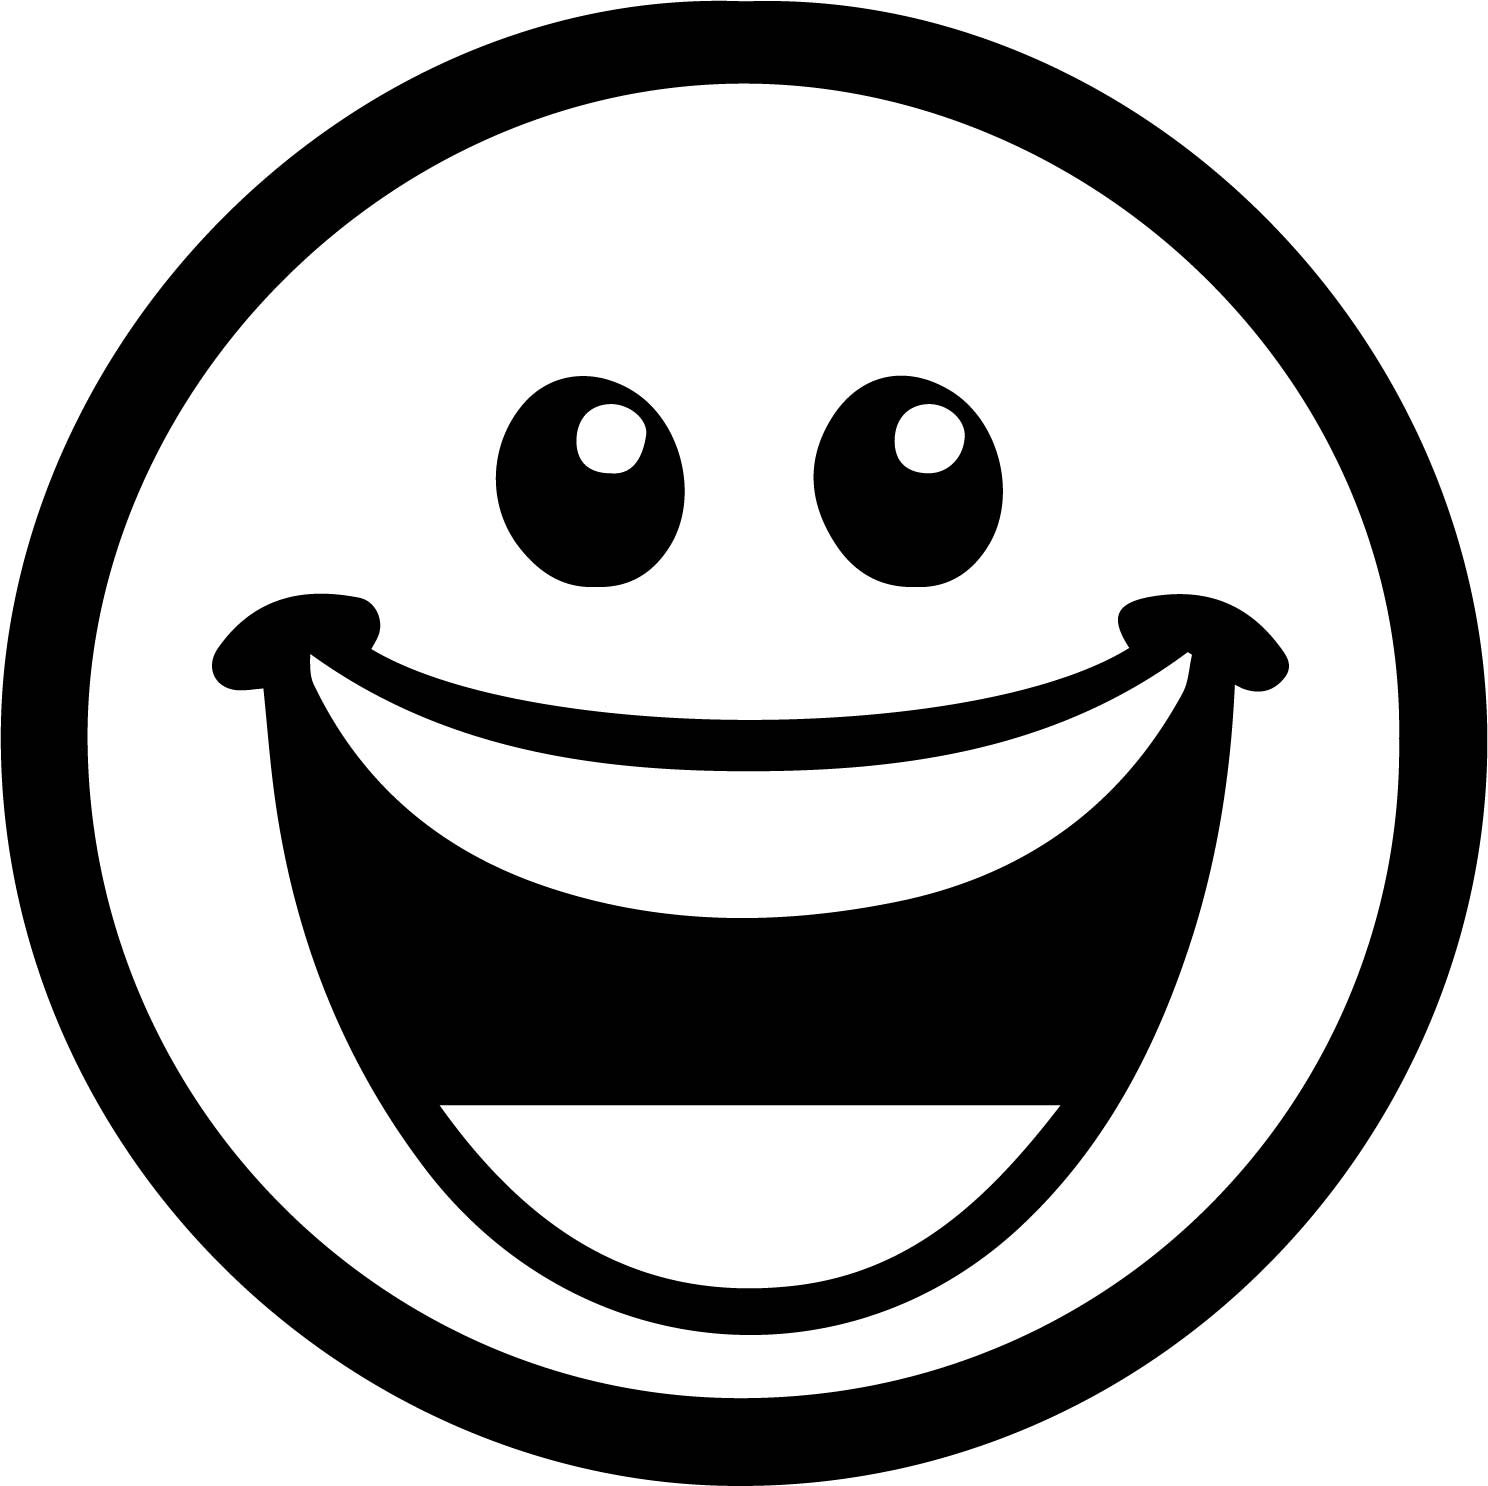 Smiley face coloring pages printable for free download